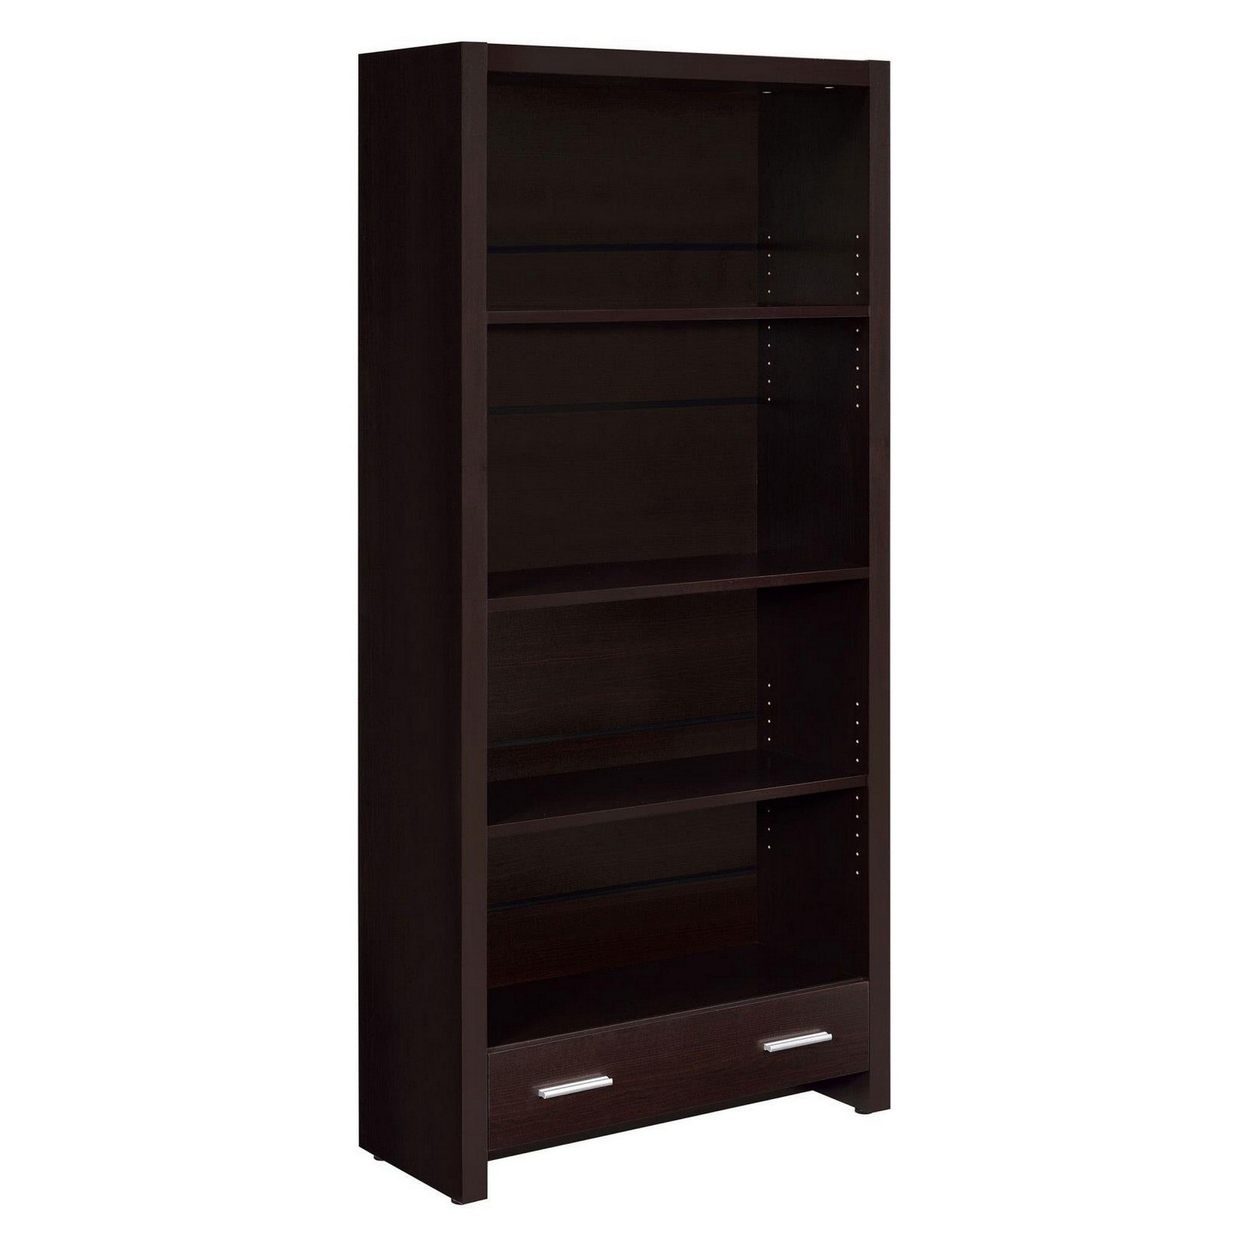 Wooden Bookcase With 3 Shelves And 1 Drawer, Dark Brown- Saltoro Sherpi